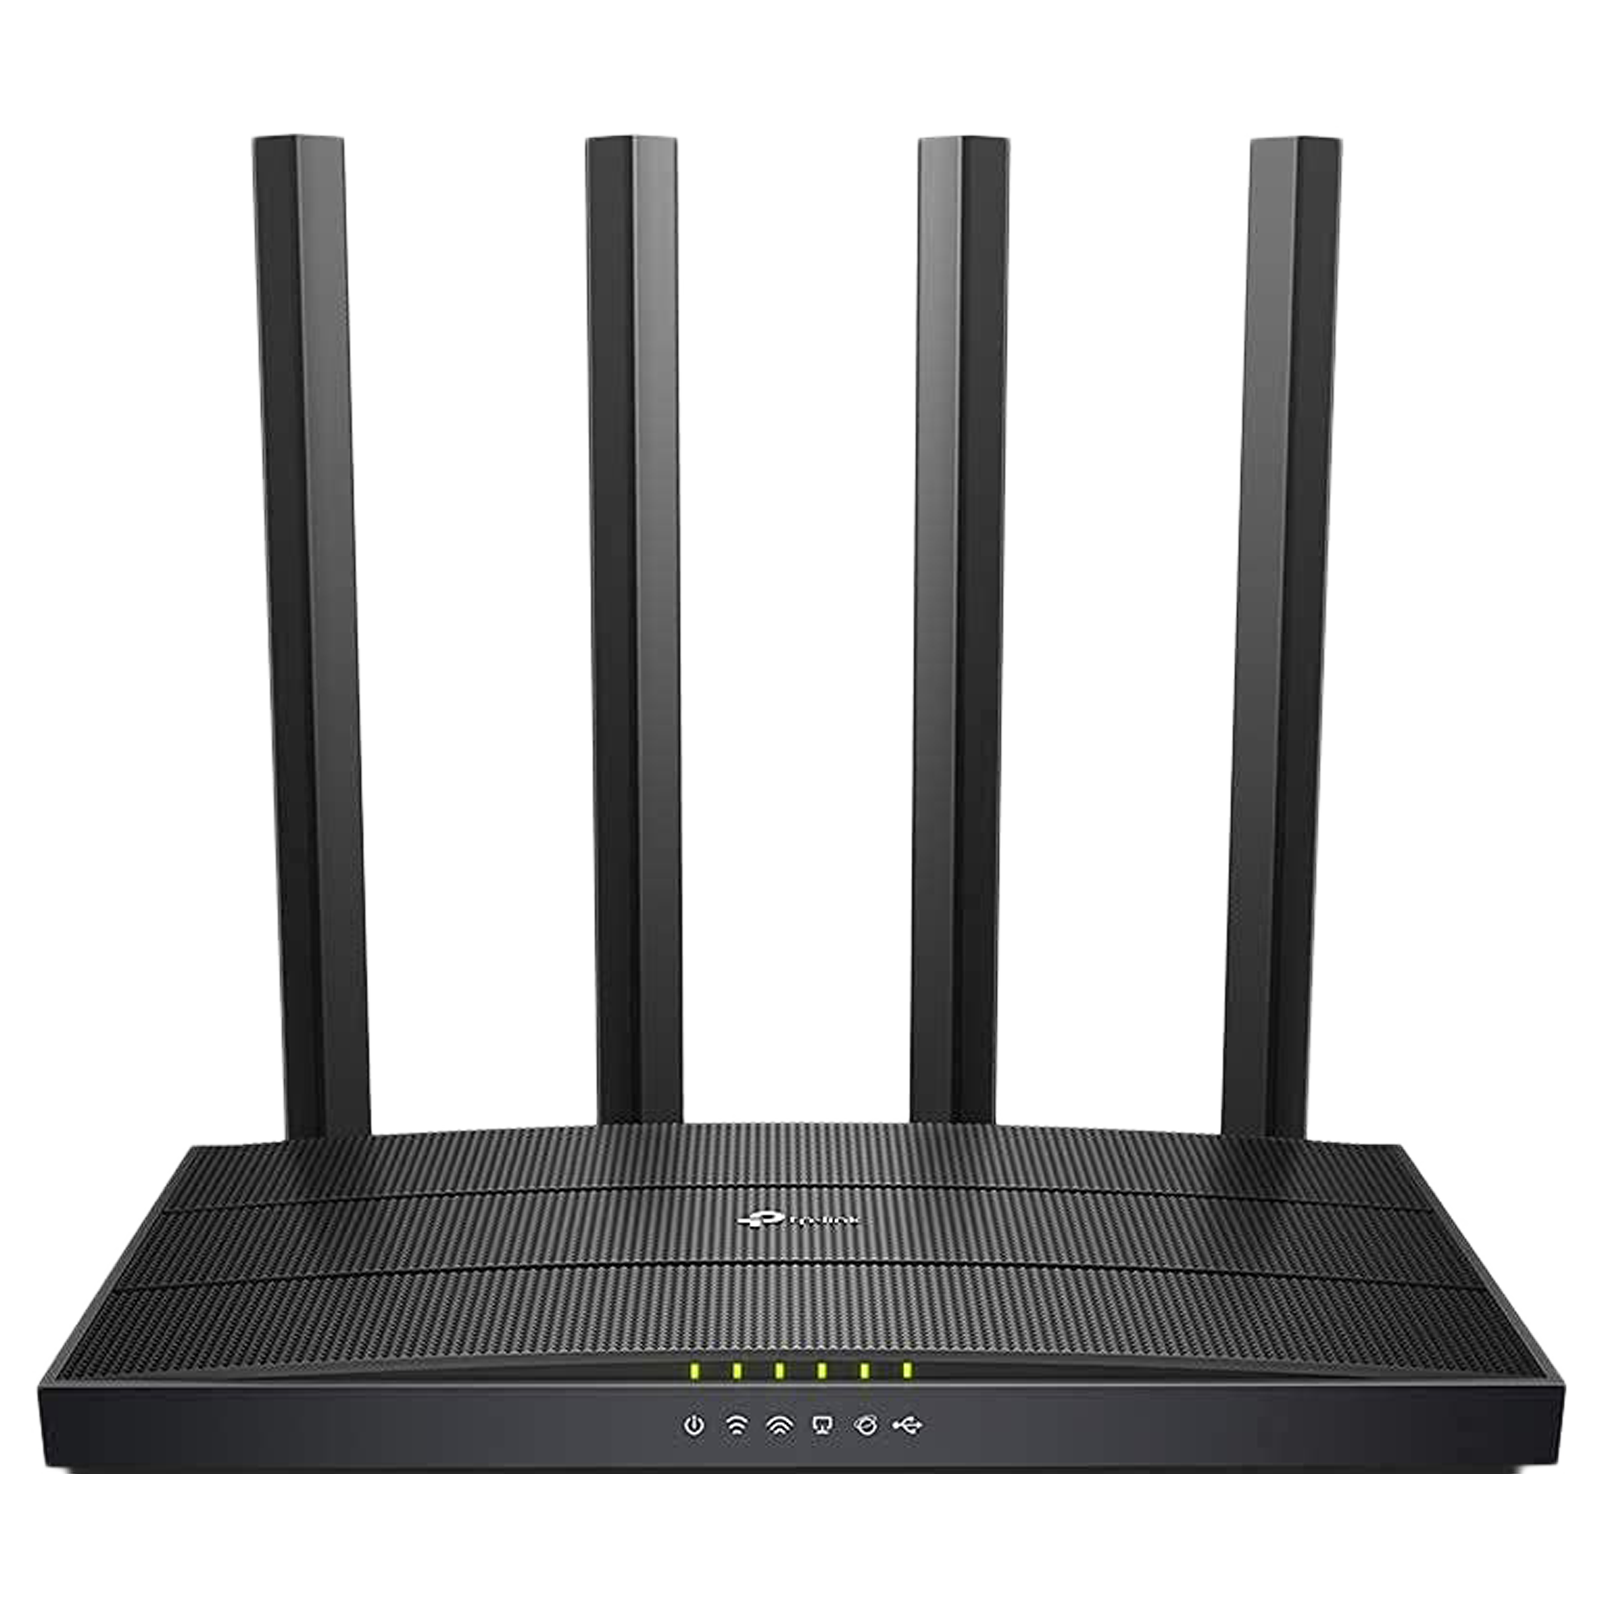 TP Link Archer C6U – AC1200 Wi-Fi Router Full Gigabit 1200 Mbps Wireless Router  (Black, Dual Band)